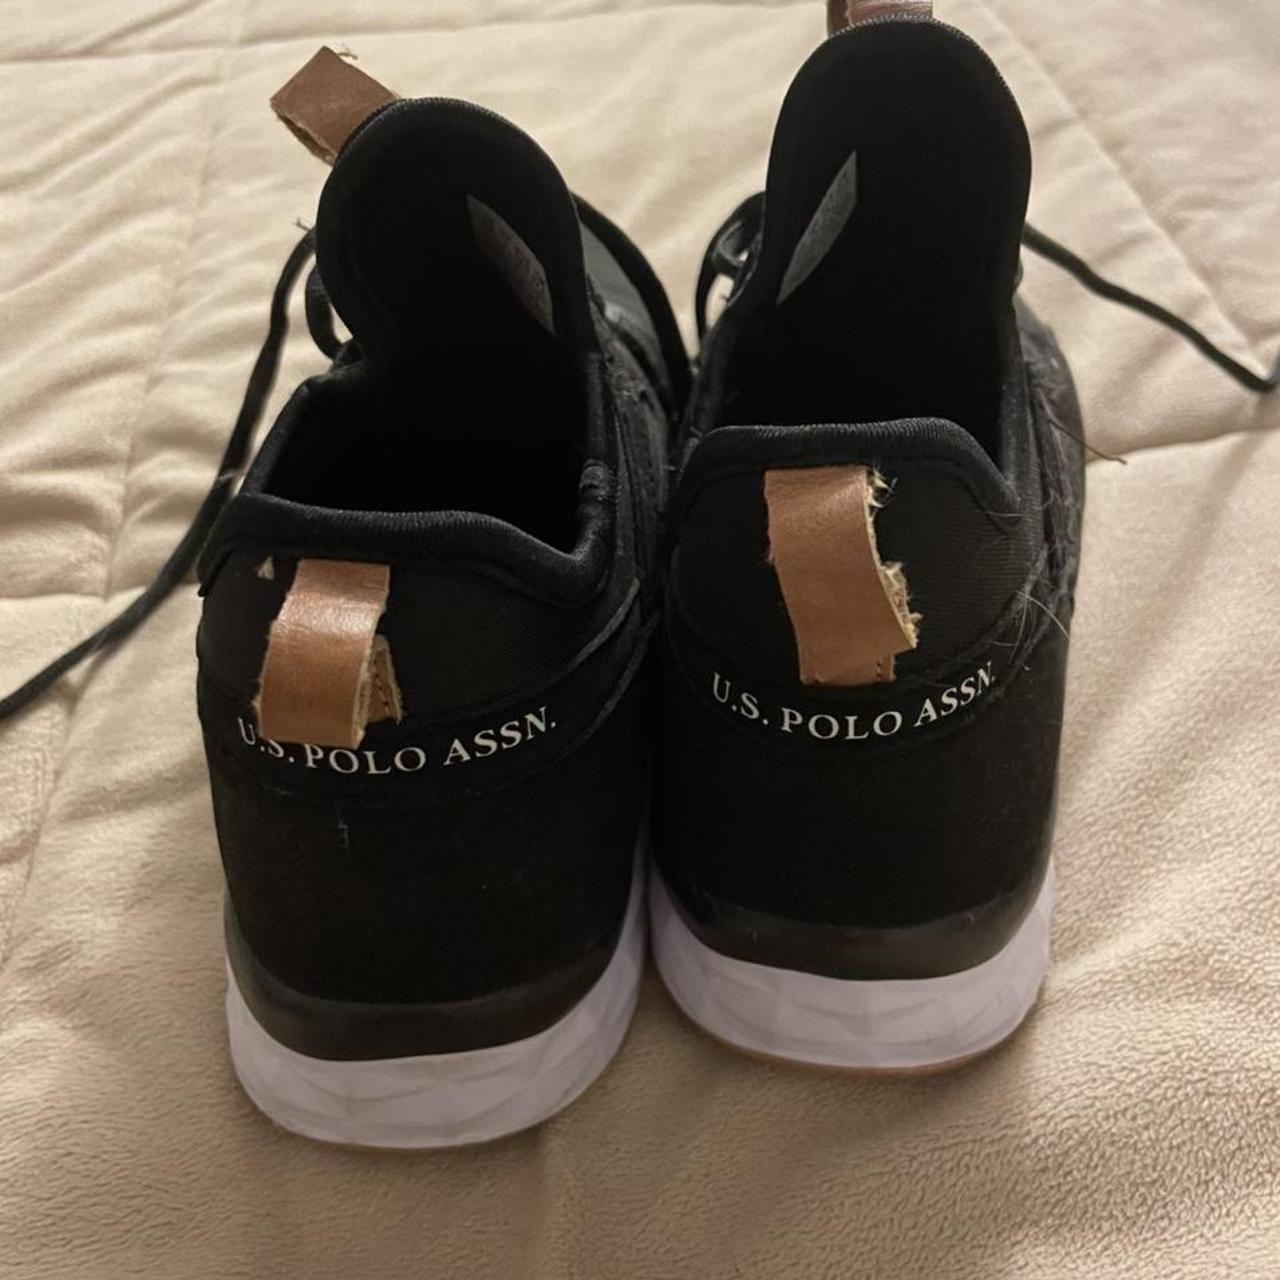 U.S. Polo Assn. Women's Black and Gold Trainers (3)